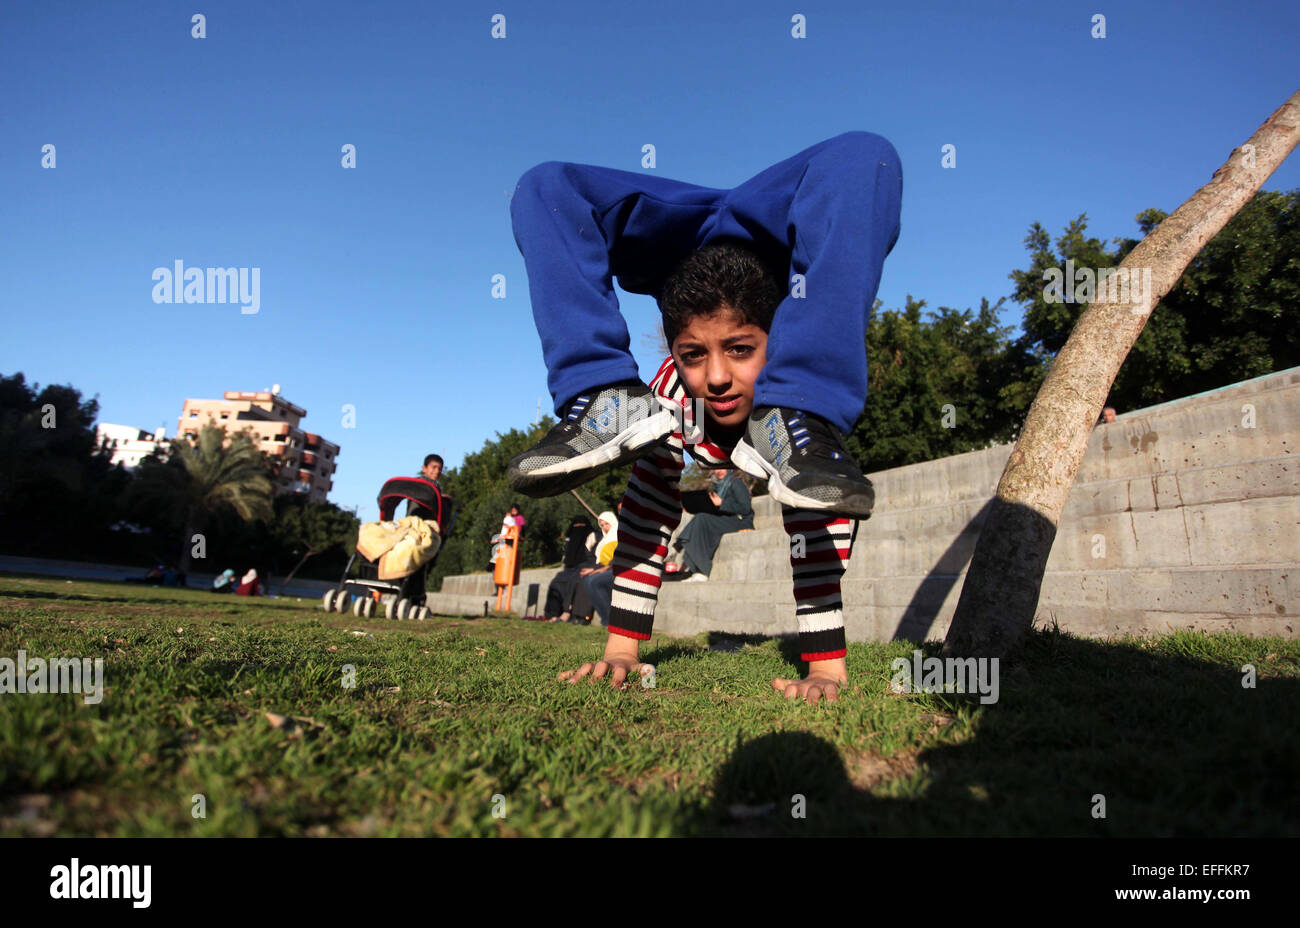 Feb. 3, 2015 - Gaza City, Gaza Strip - MOHAMMED EL-SHEIKH, a 11-year-old Palestinian boy, demonstrates his skills in Gaza City. El-sheikh is extremely flexible and has been training for only a year without any professional help. He is hoping for stardom after his success in in the hugely popular ''Arabs Got Talent'' TV show in Beirut last month. (Credit Image: © Ashraf Amra/APA Images/ZUMA Wire) Stock Photo